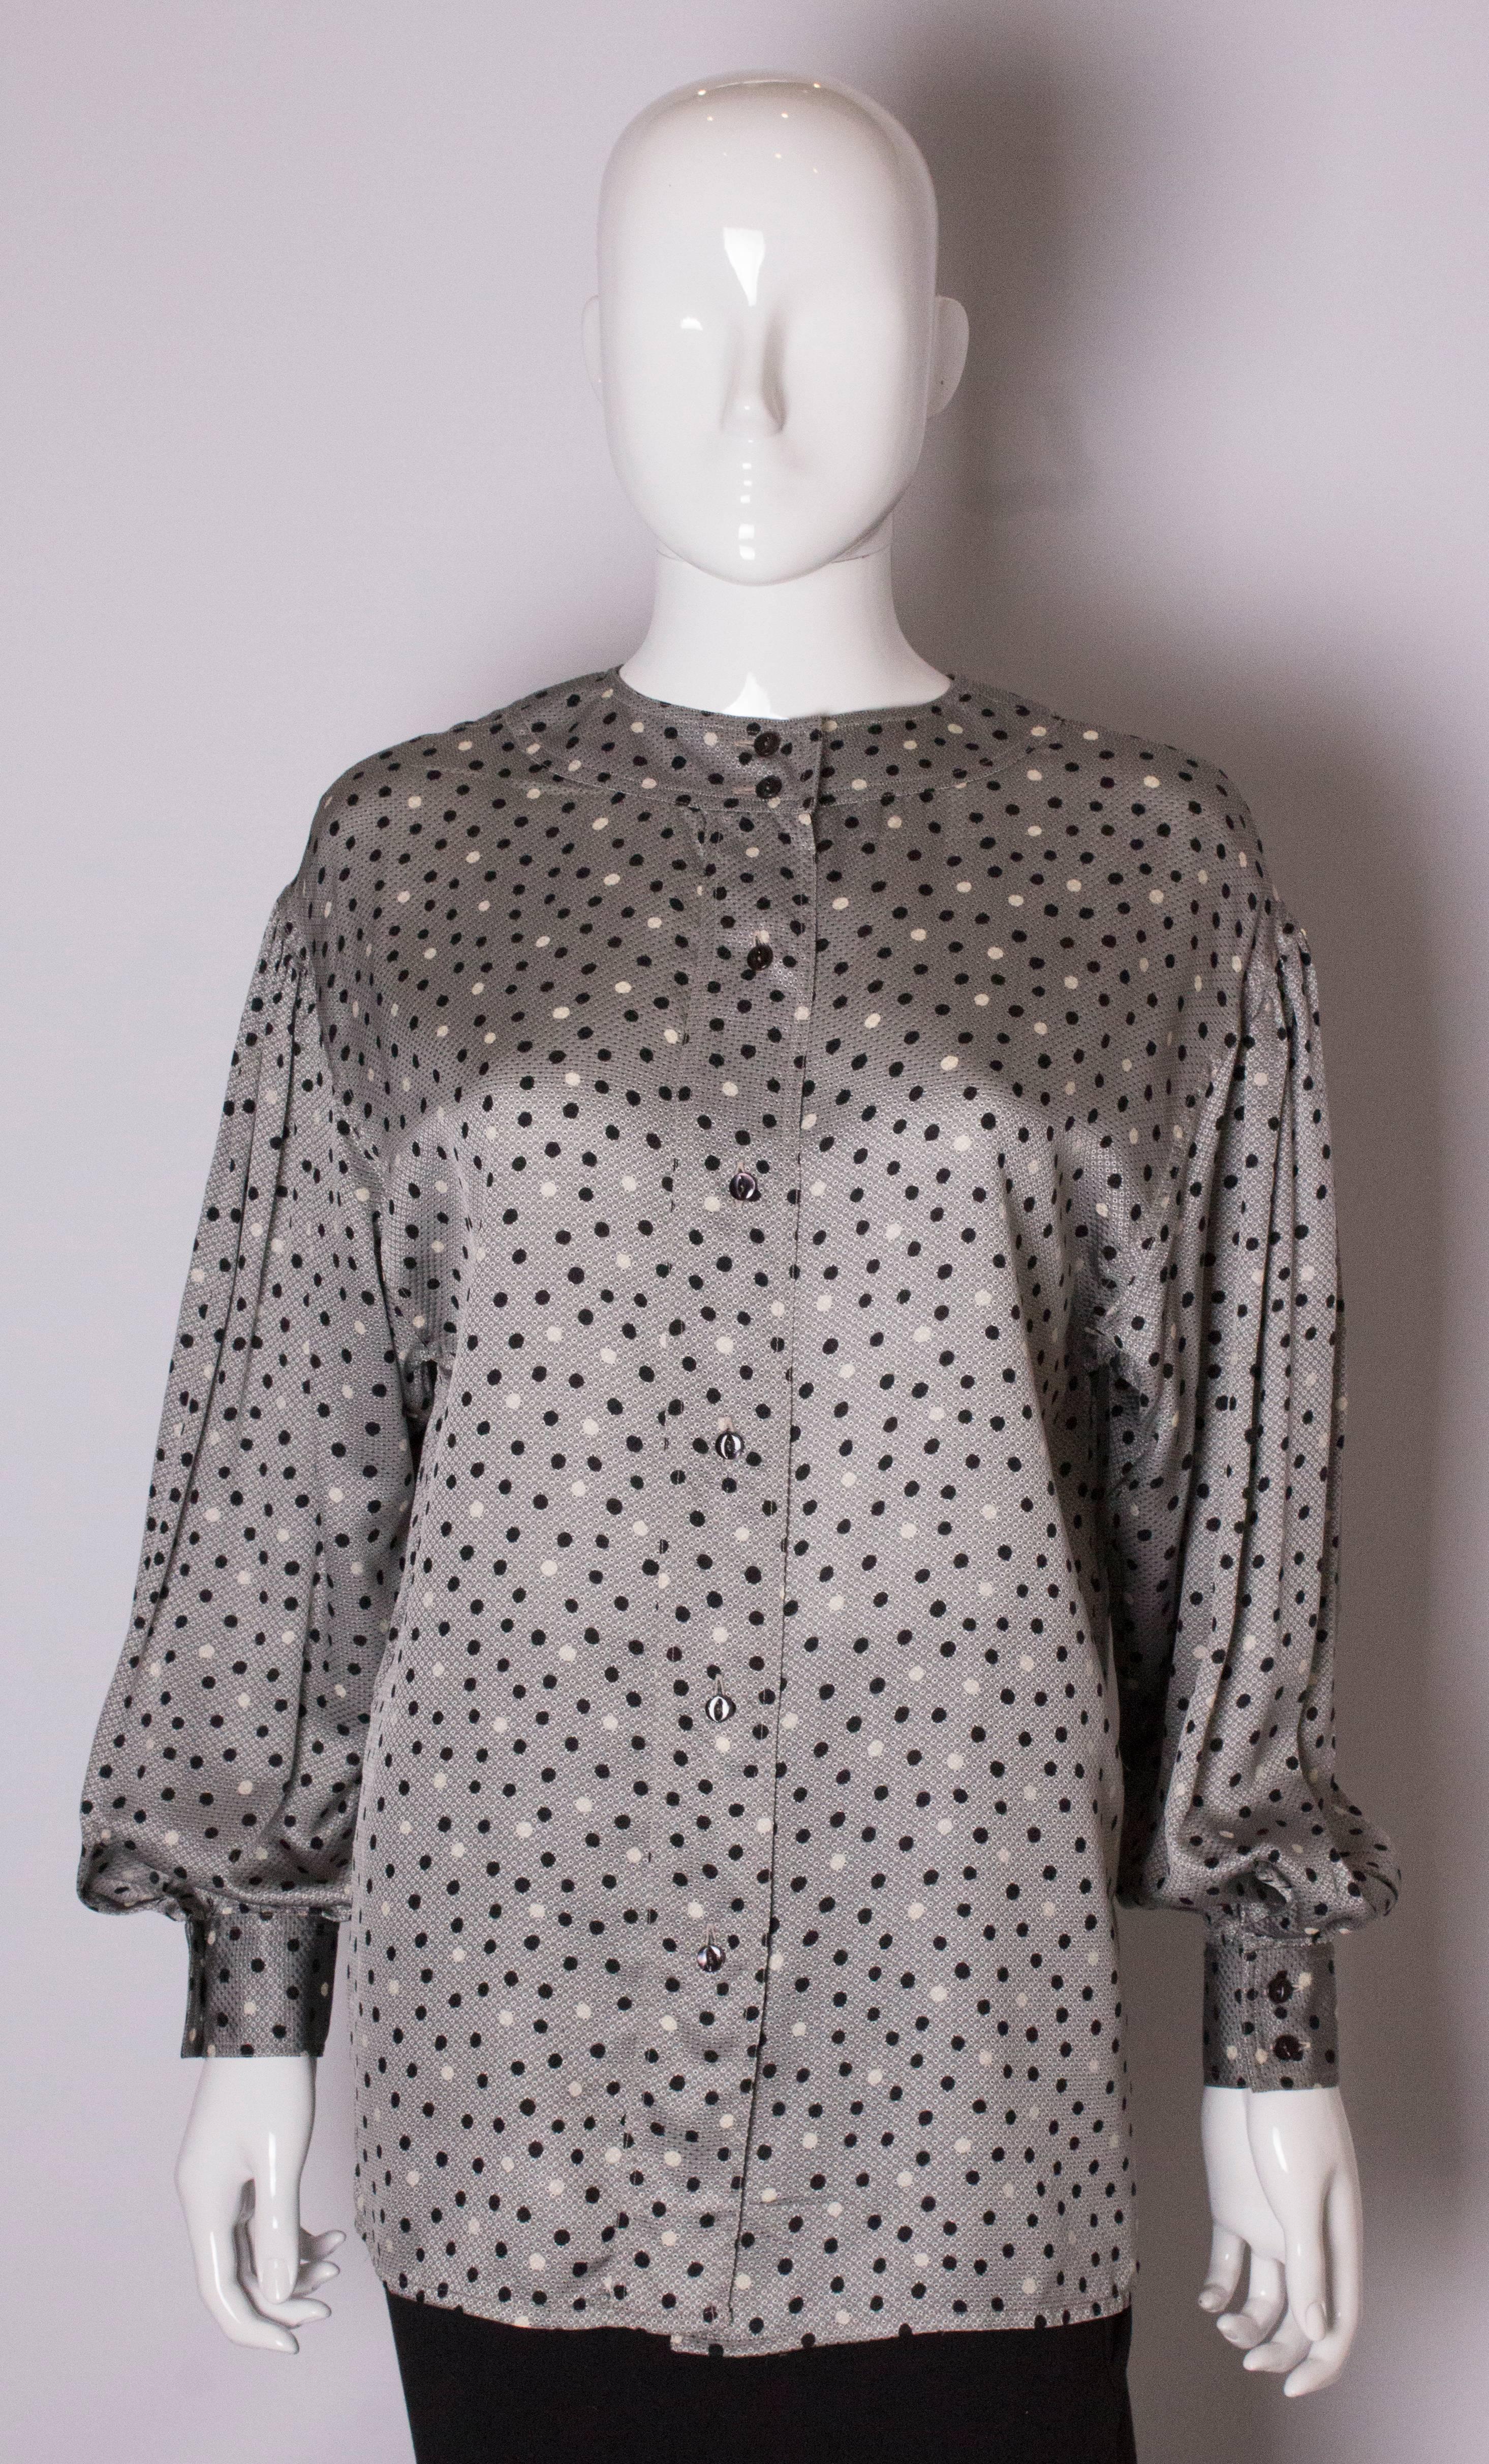 A chic vintage blouse by Ferragamo. The blouse has a grey silk background and black and white spot detail, with 2 button cuffs , round neckline and button opening at the back, with foldovers at the front.